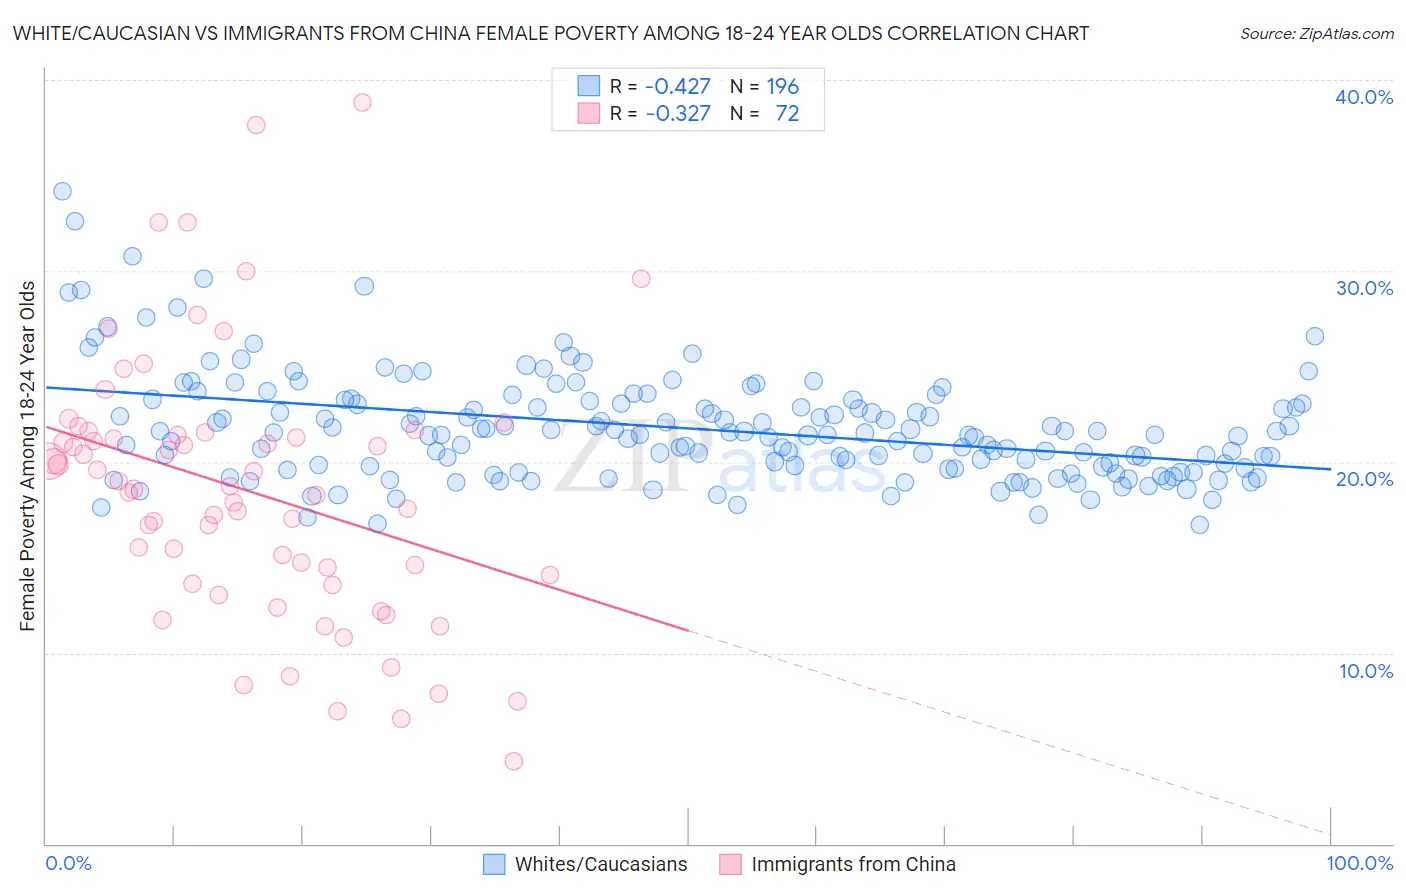 White/Caucasian vs Immigrants from China Female Poverty Among 18-24 Year Olds